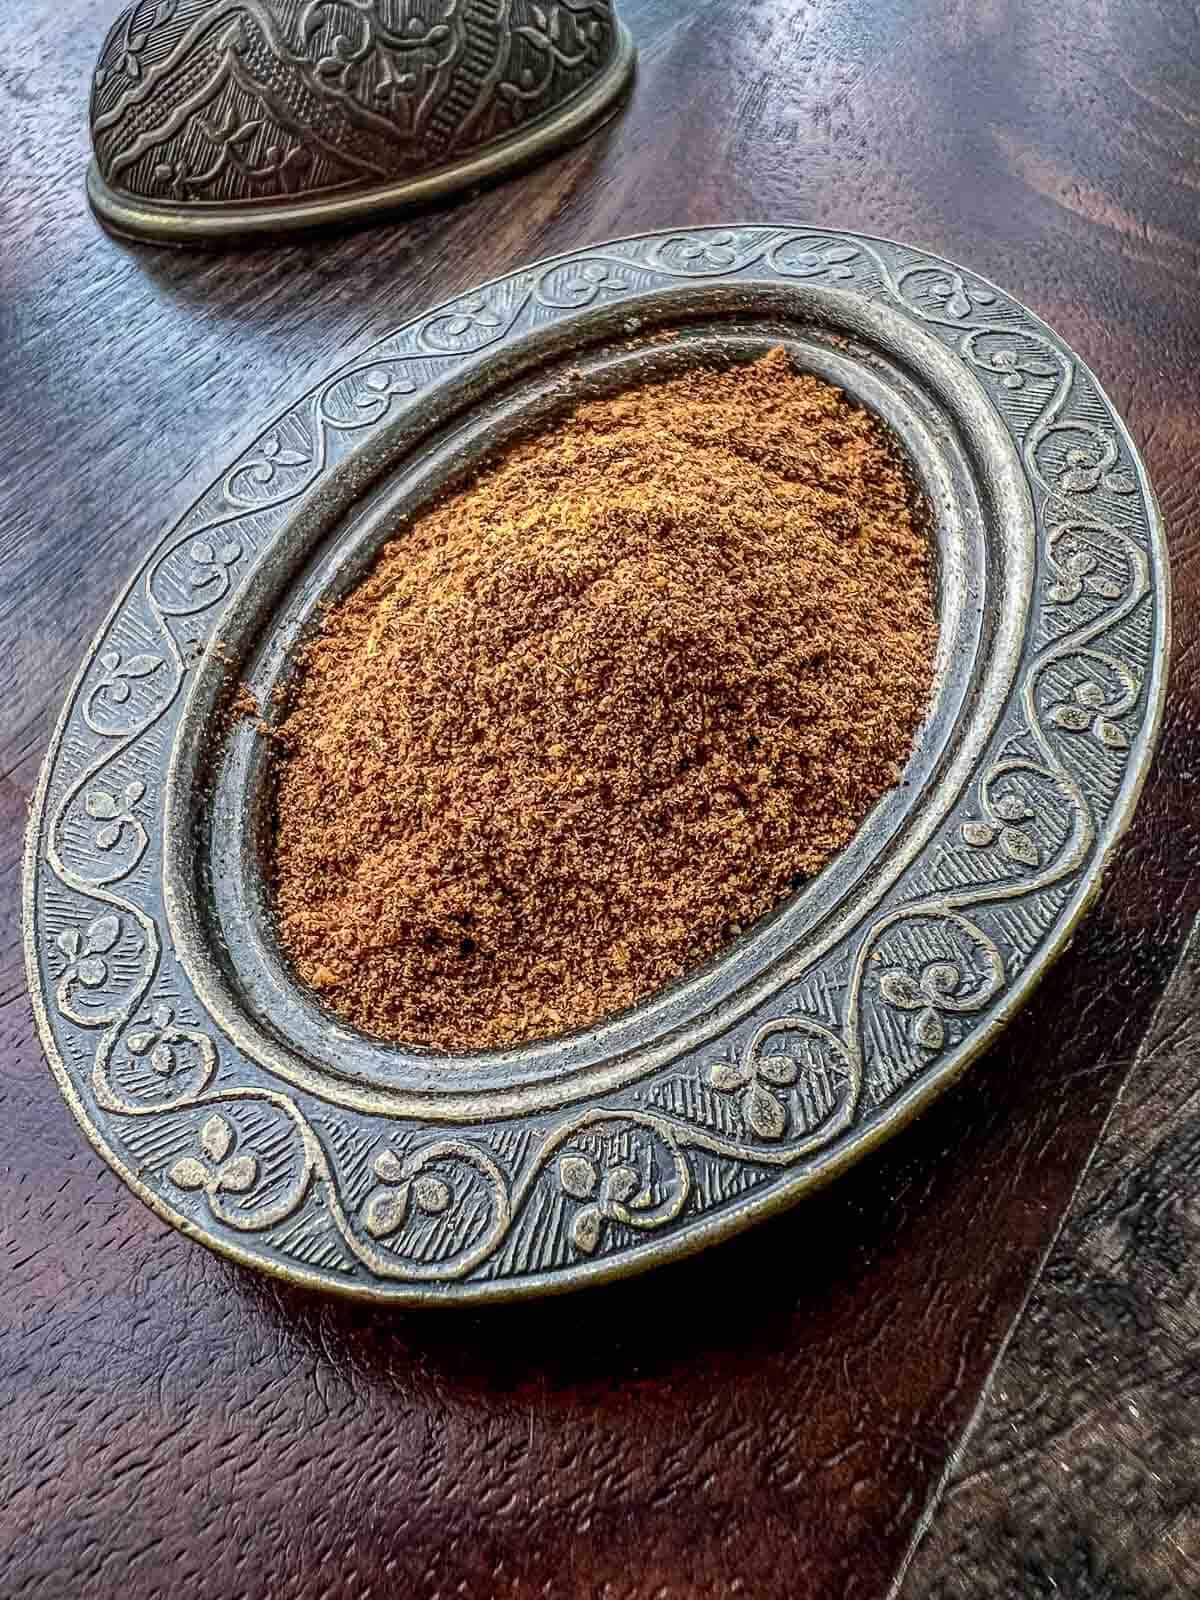 lebanese seven spices in middle-eastern style plate.